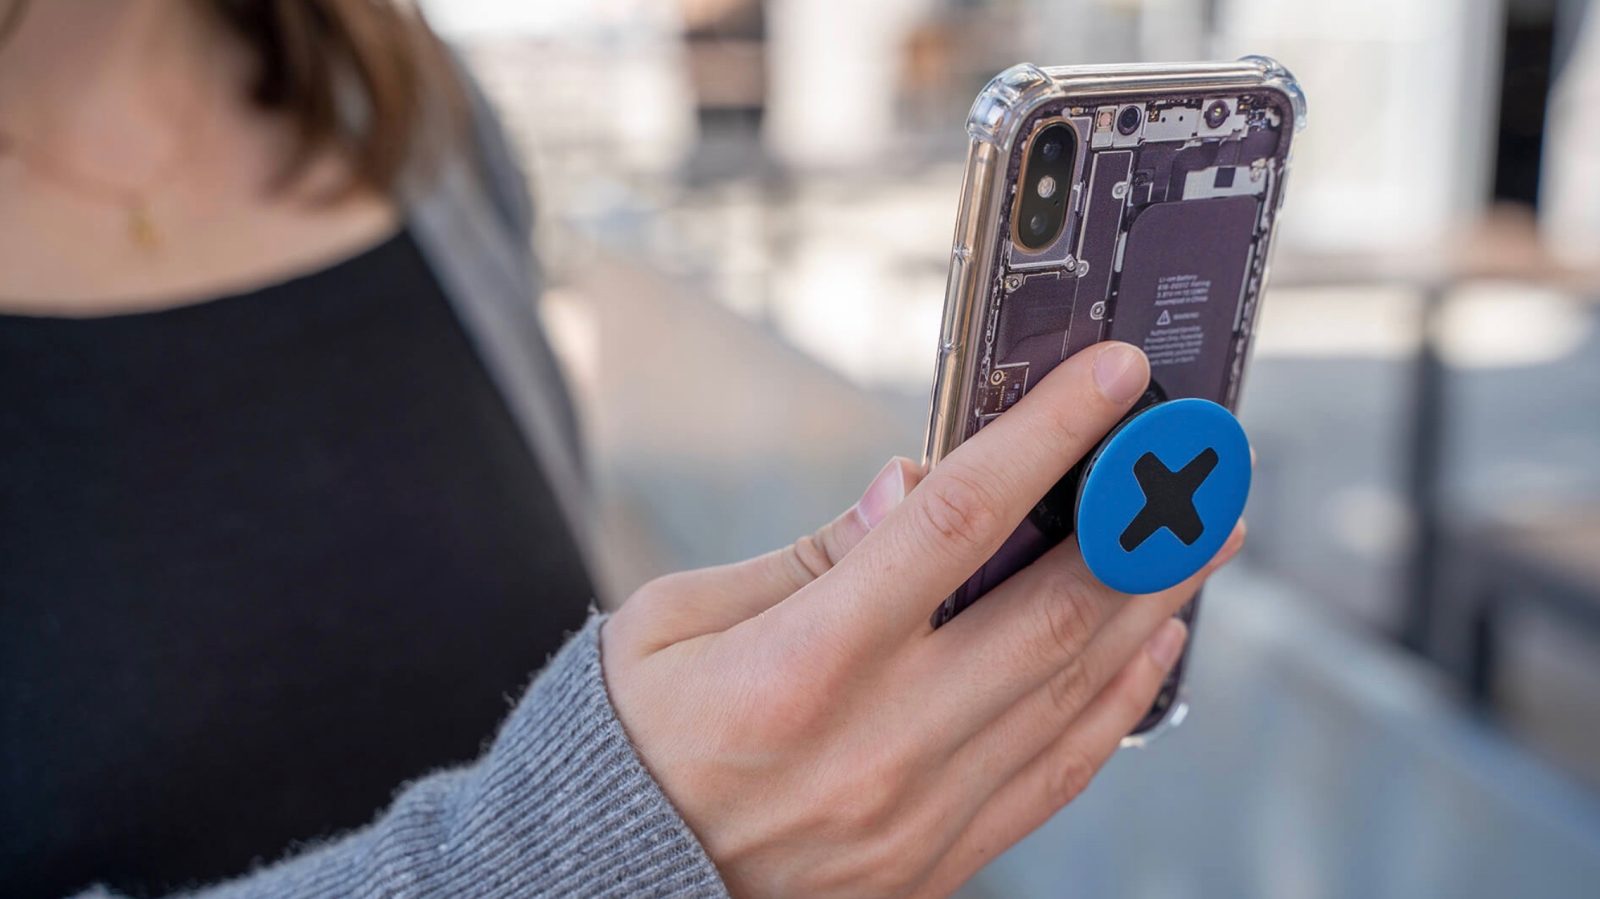 iFixit releases new 'Insight' iPhone